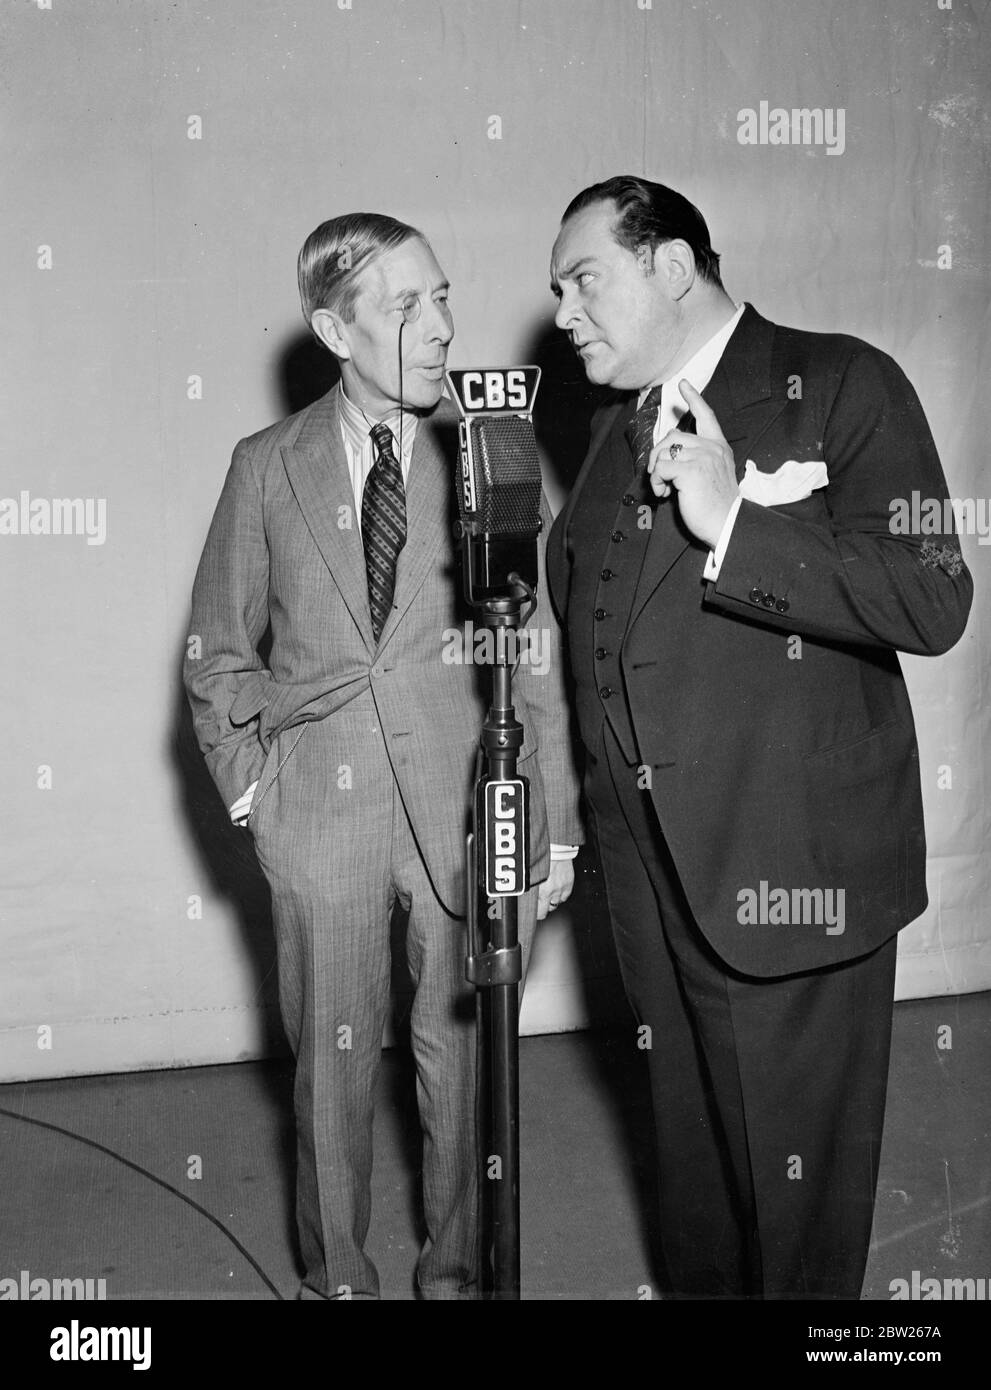 George Arliss broadcast with Edward Arnold. Radio version of 'Disraeli'. Mr George Arliss, the British film and stage actor, made one of his rare radio 'appearances' when he broadcast is great success 'Disraeli' from the Hollywood studio of the Columbia broadcasting system. The radio version was produced by Edward Arnold, the film actor. Photo shows, George Arliss (left) with Edward Arnold before the microphone in Hollywood. 29 January 1938 Stock Photo